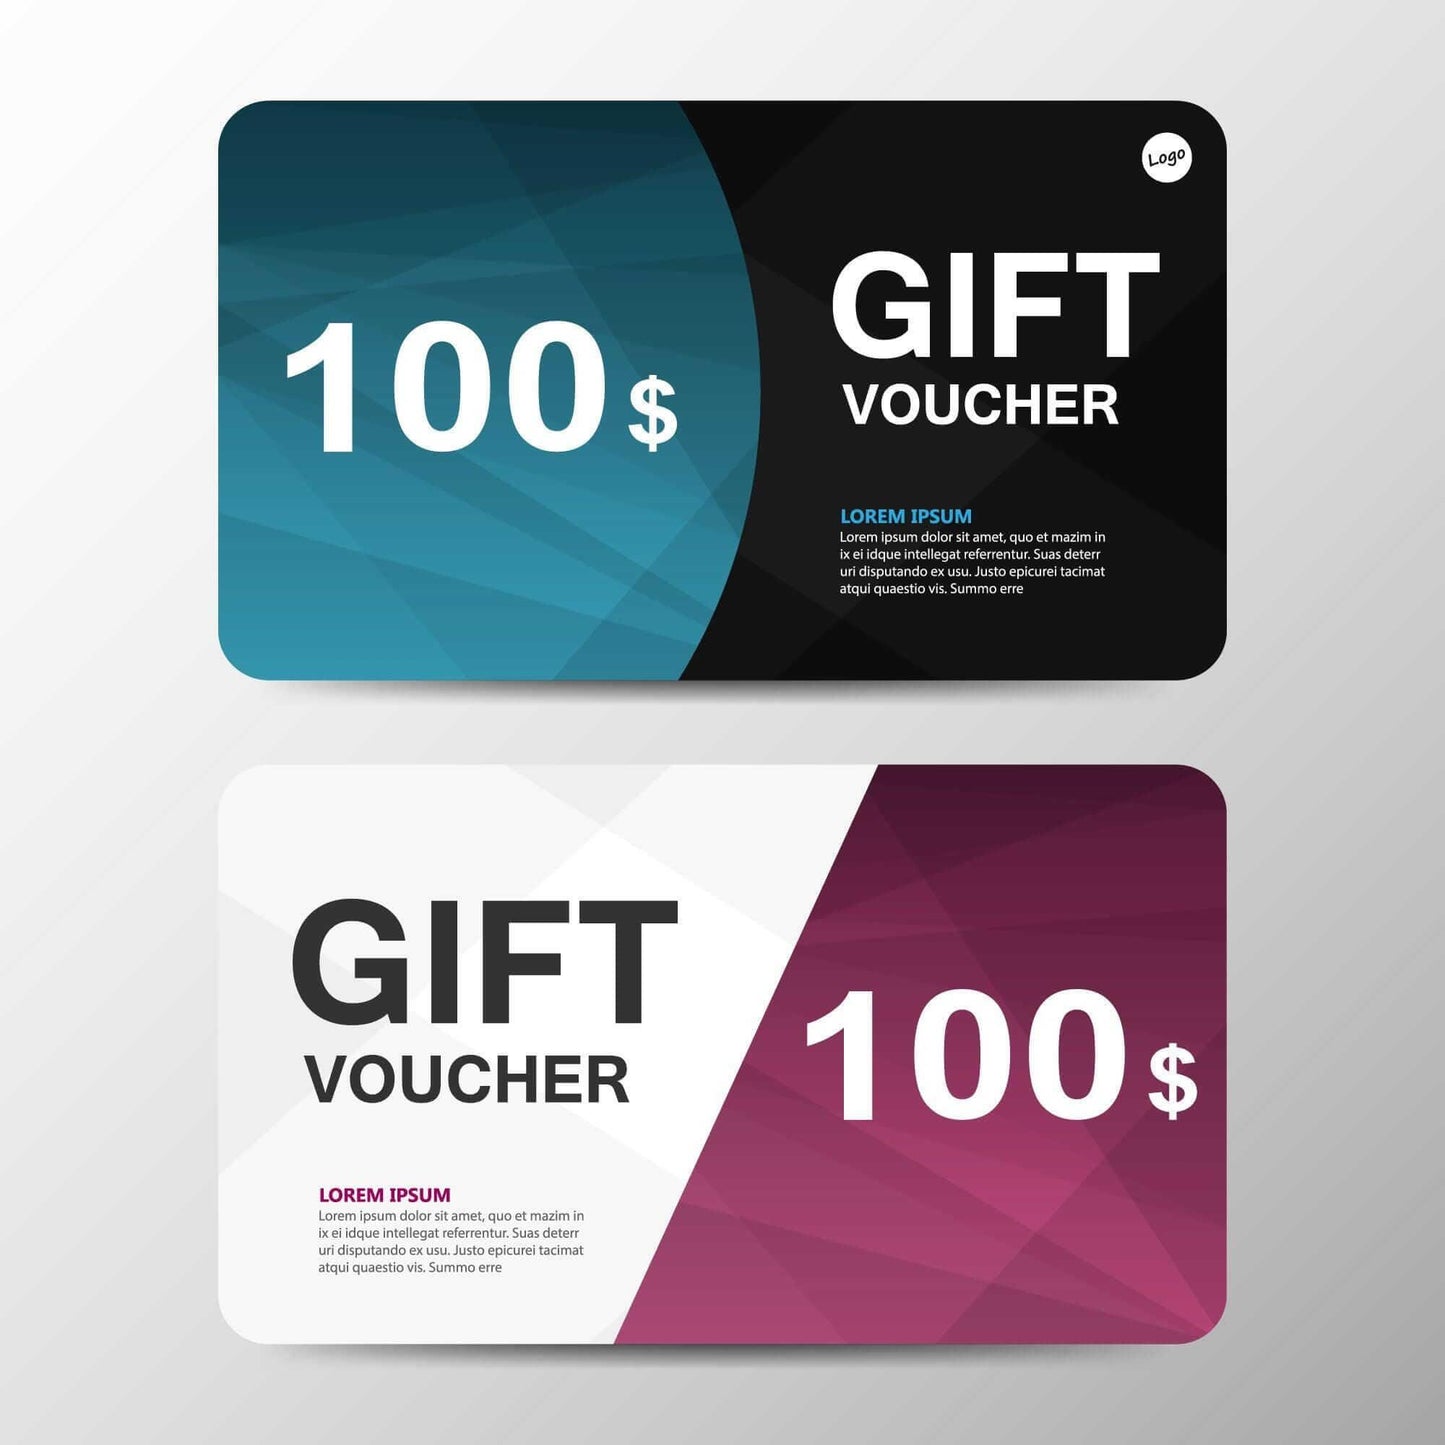 Digital Gift Cards | The Perfect Gift Idea | Odell Creations